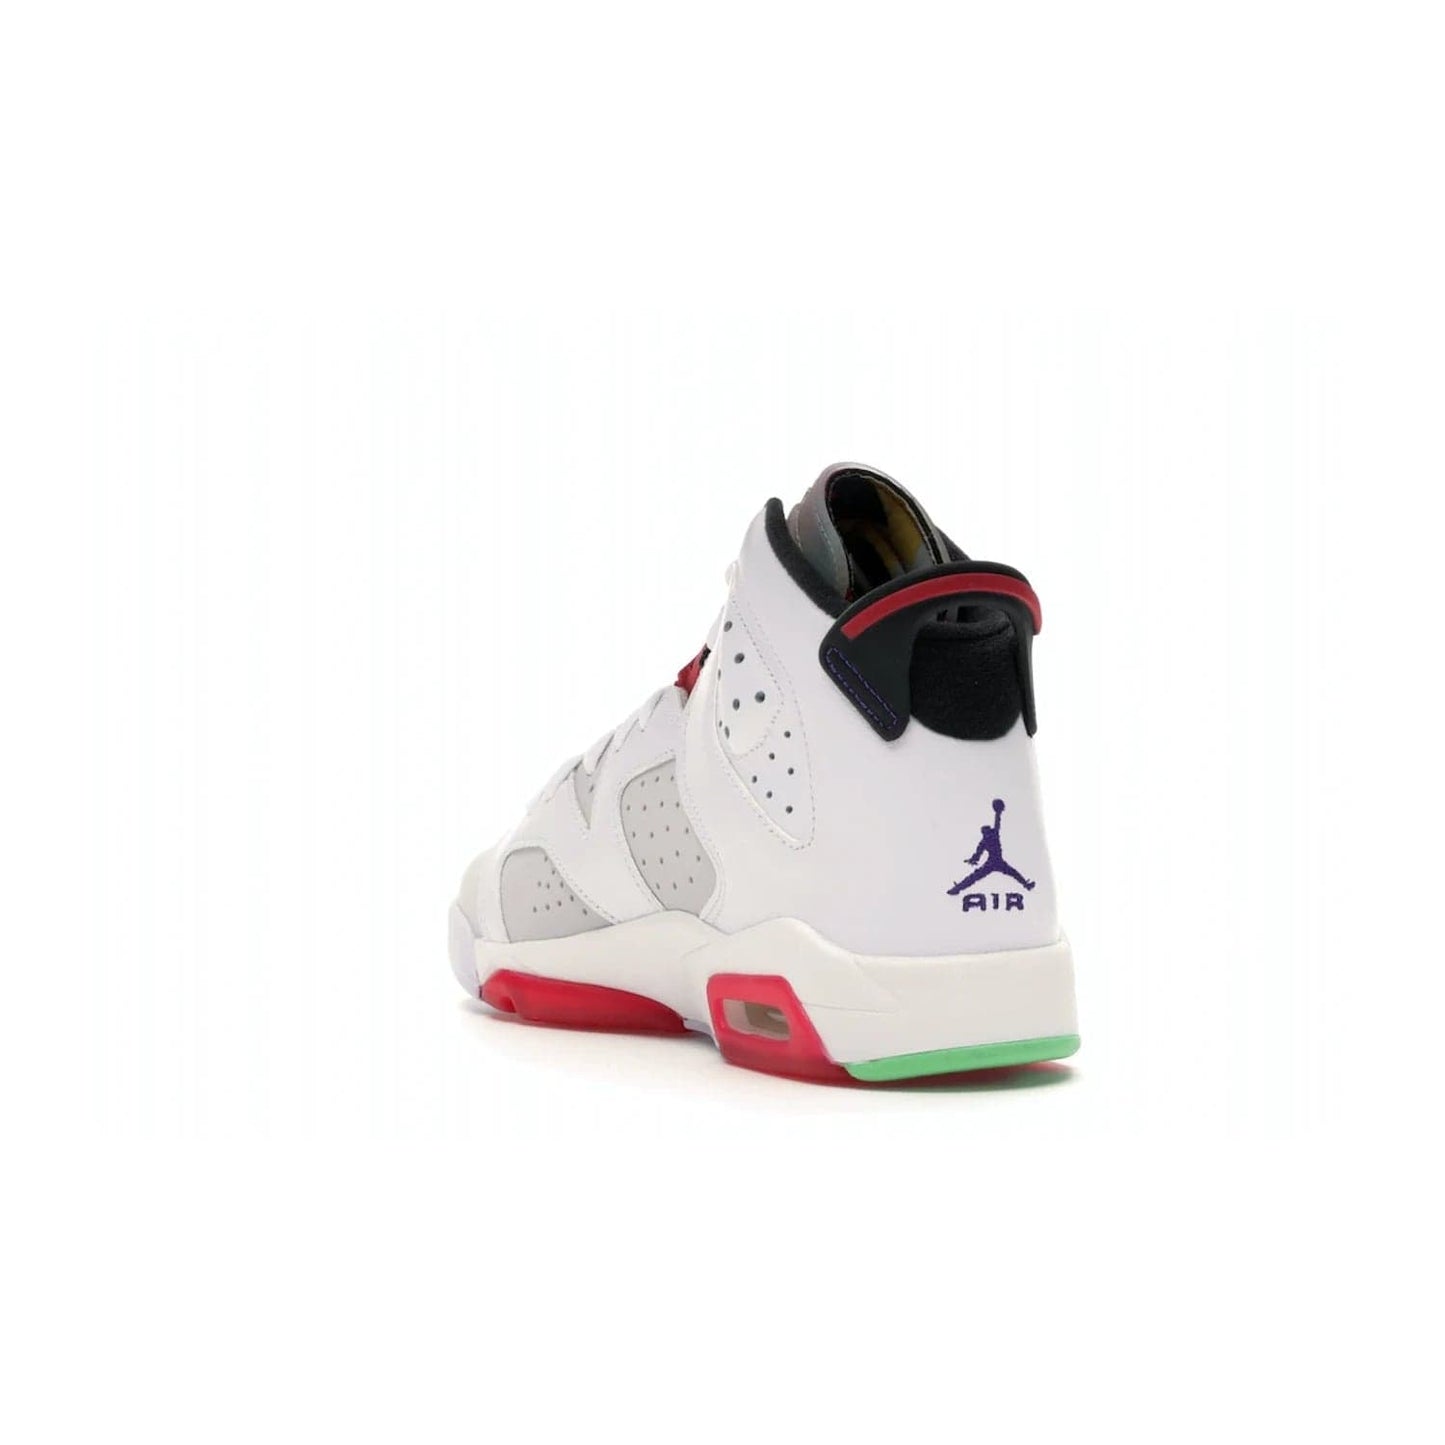 Jordan 6 Retro Hare (GS) - Image 25 - Only at www.BallersClubKickz.com - The Air Jordan 6 Hare GS. Comfortable suede upper, perforations, red pods, two-tone midsole, and signature "Jumpman" emblem. Released 17 June 2020. Perfect for any sneakerhead.